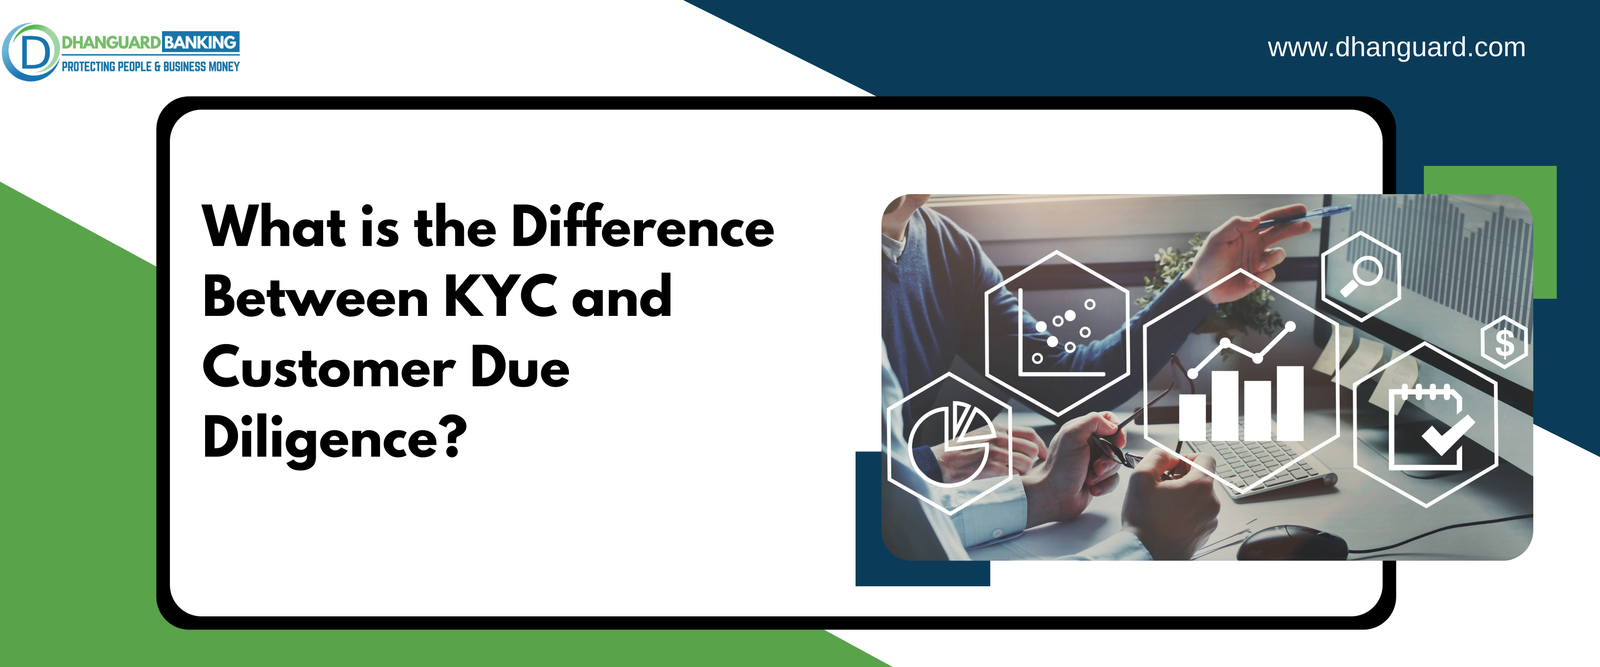 What is the Difference Between KYC and Customer Due Diligence? | Dhanguard